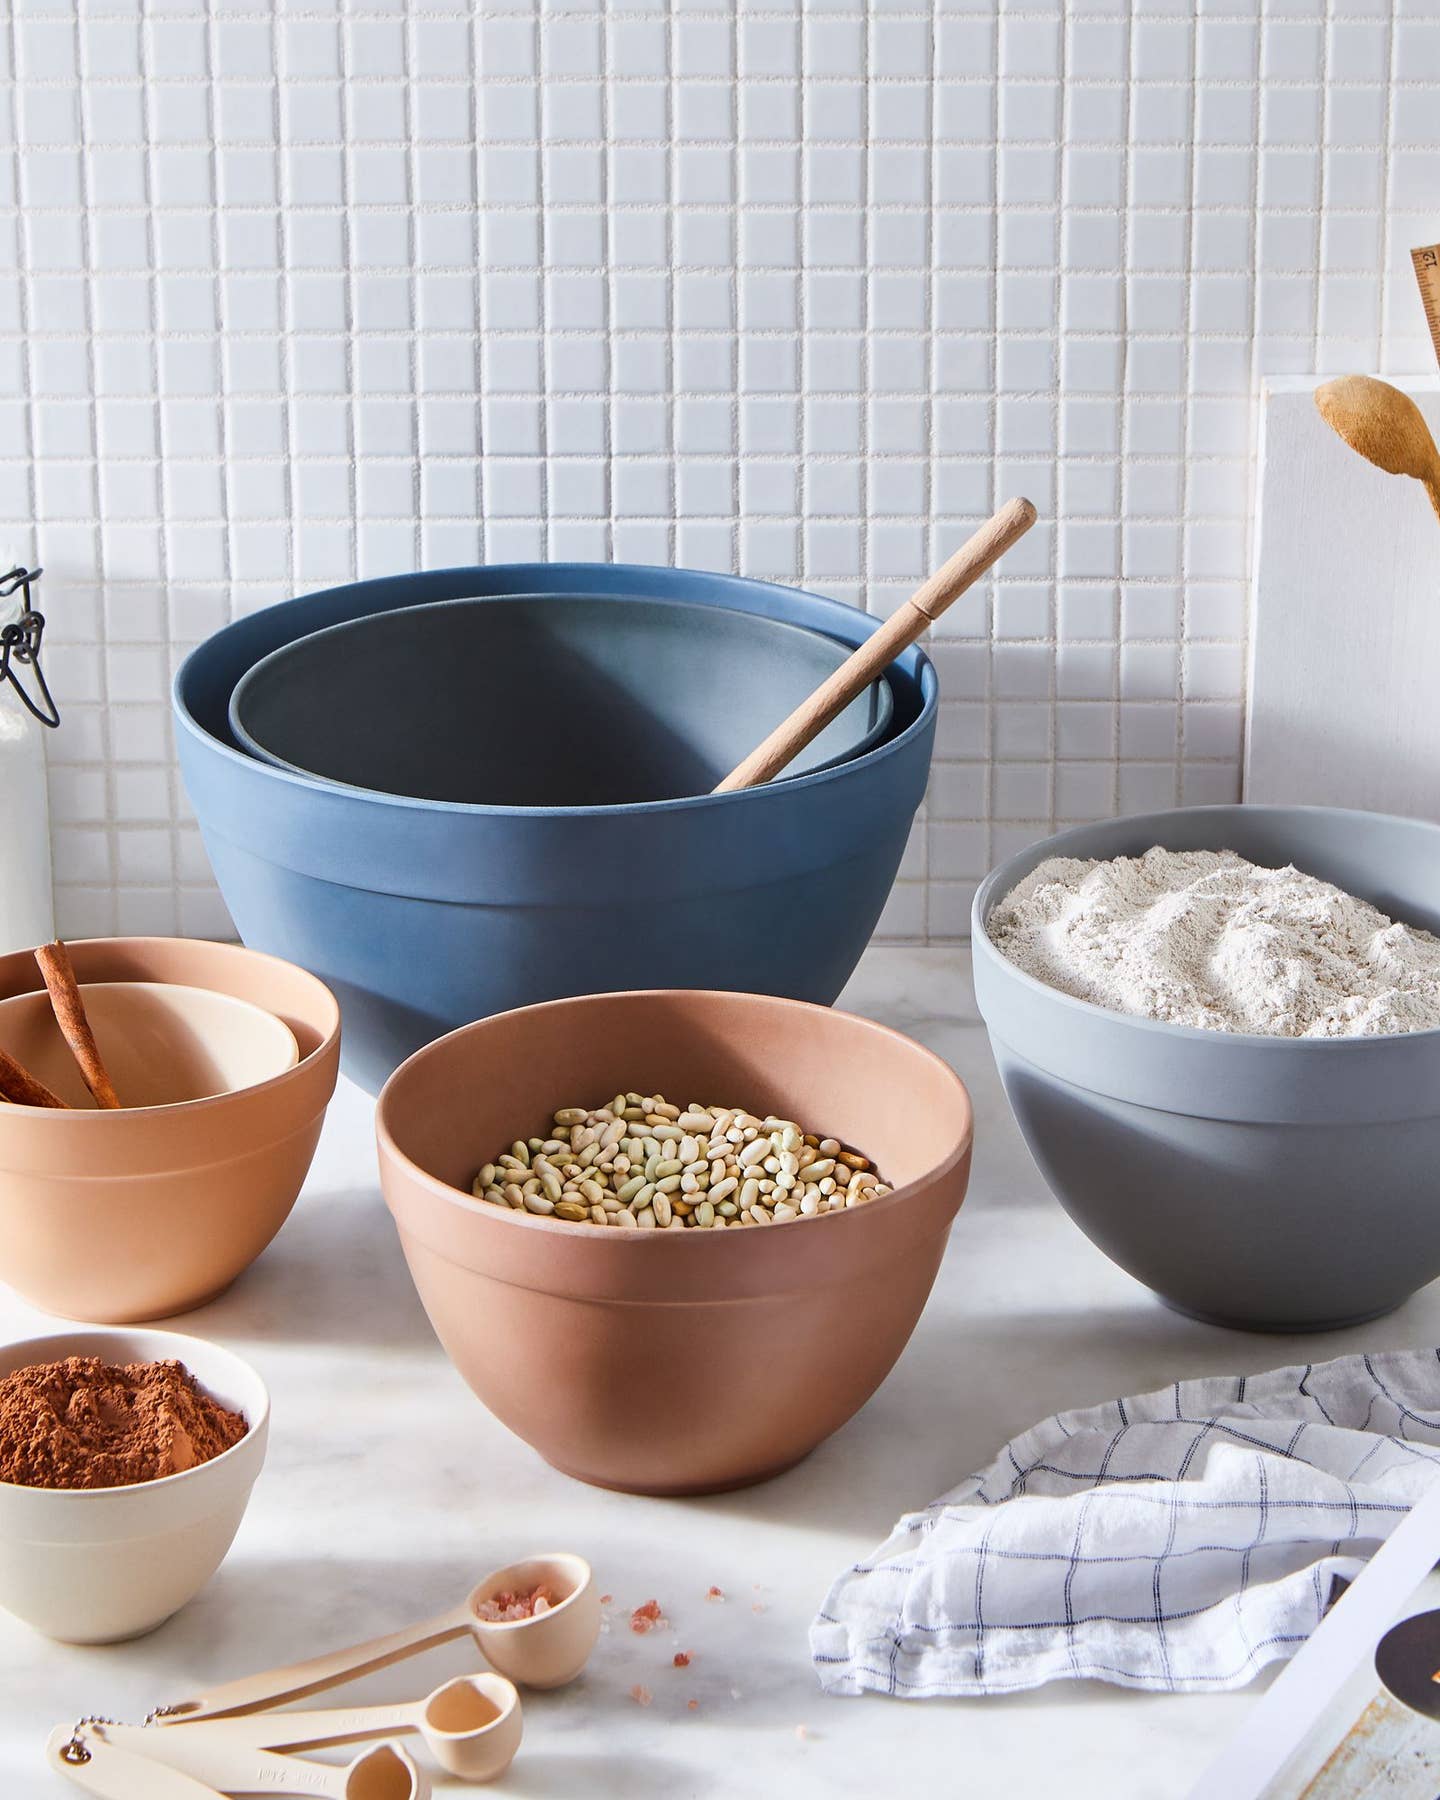 The Best Mixing Bowls to Replace Your Old Mismatched Set